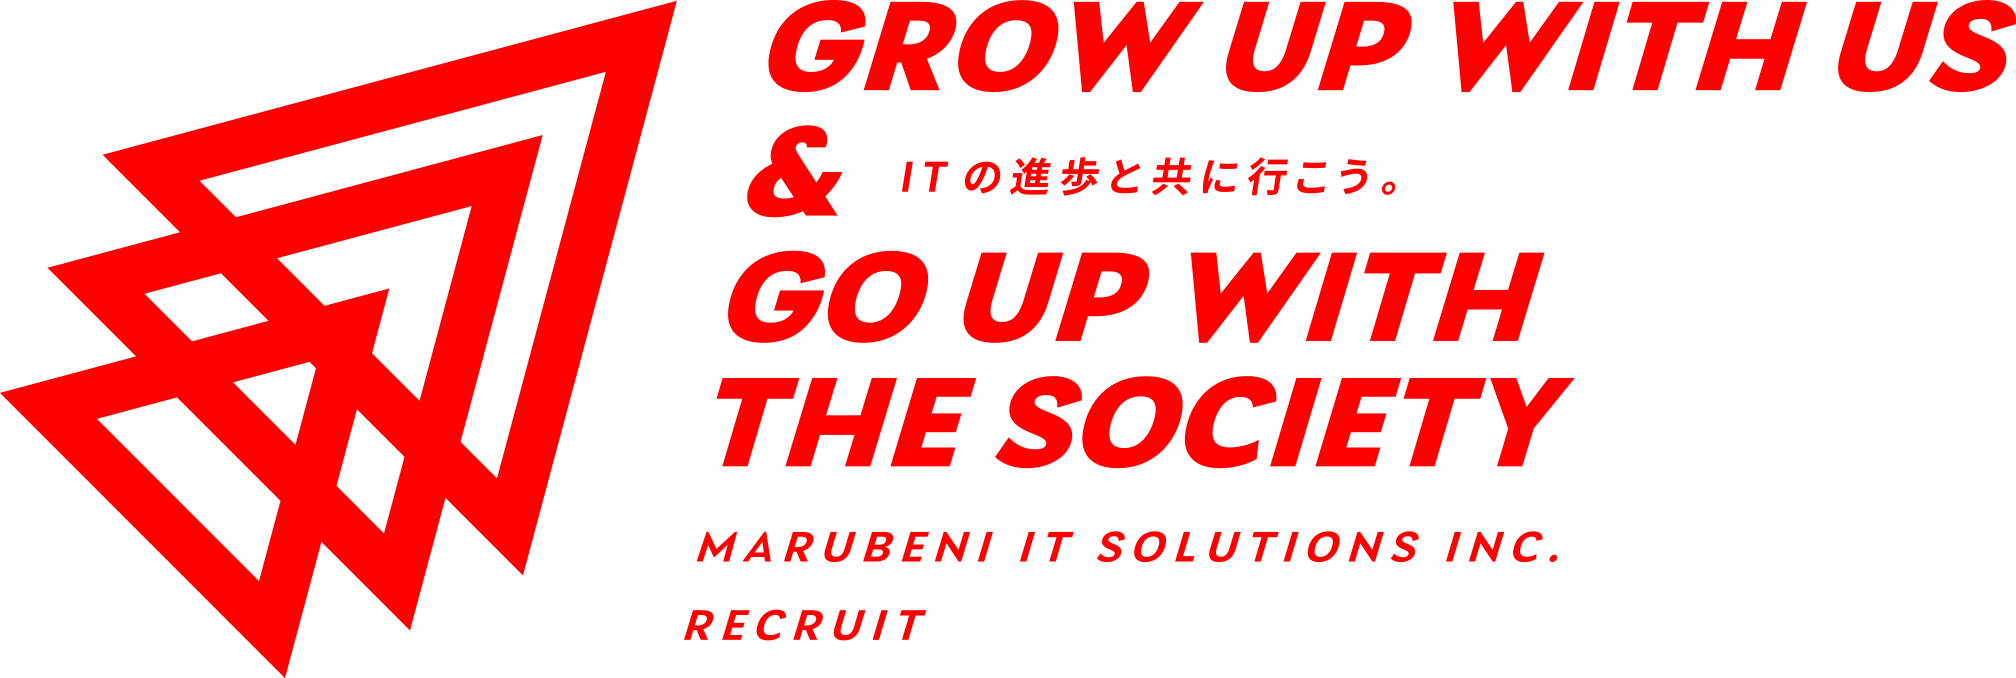 GROW UP WITH US & GO UP WITH THE SOCIETY ITの進歩と共に行こう。MARUBENI IT SOLUTIONS INC. RECRUIT